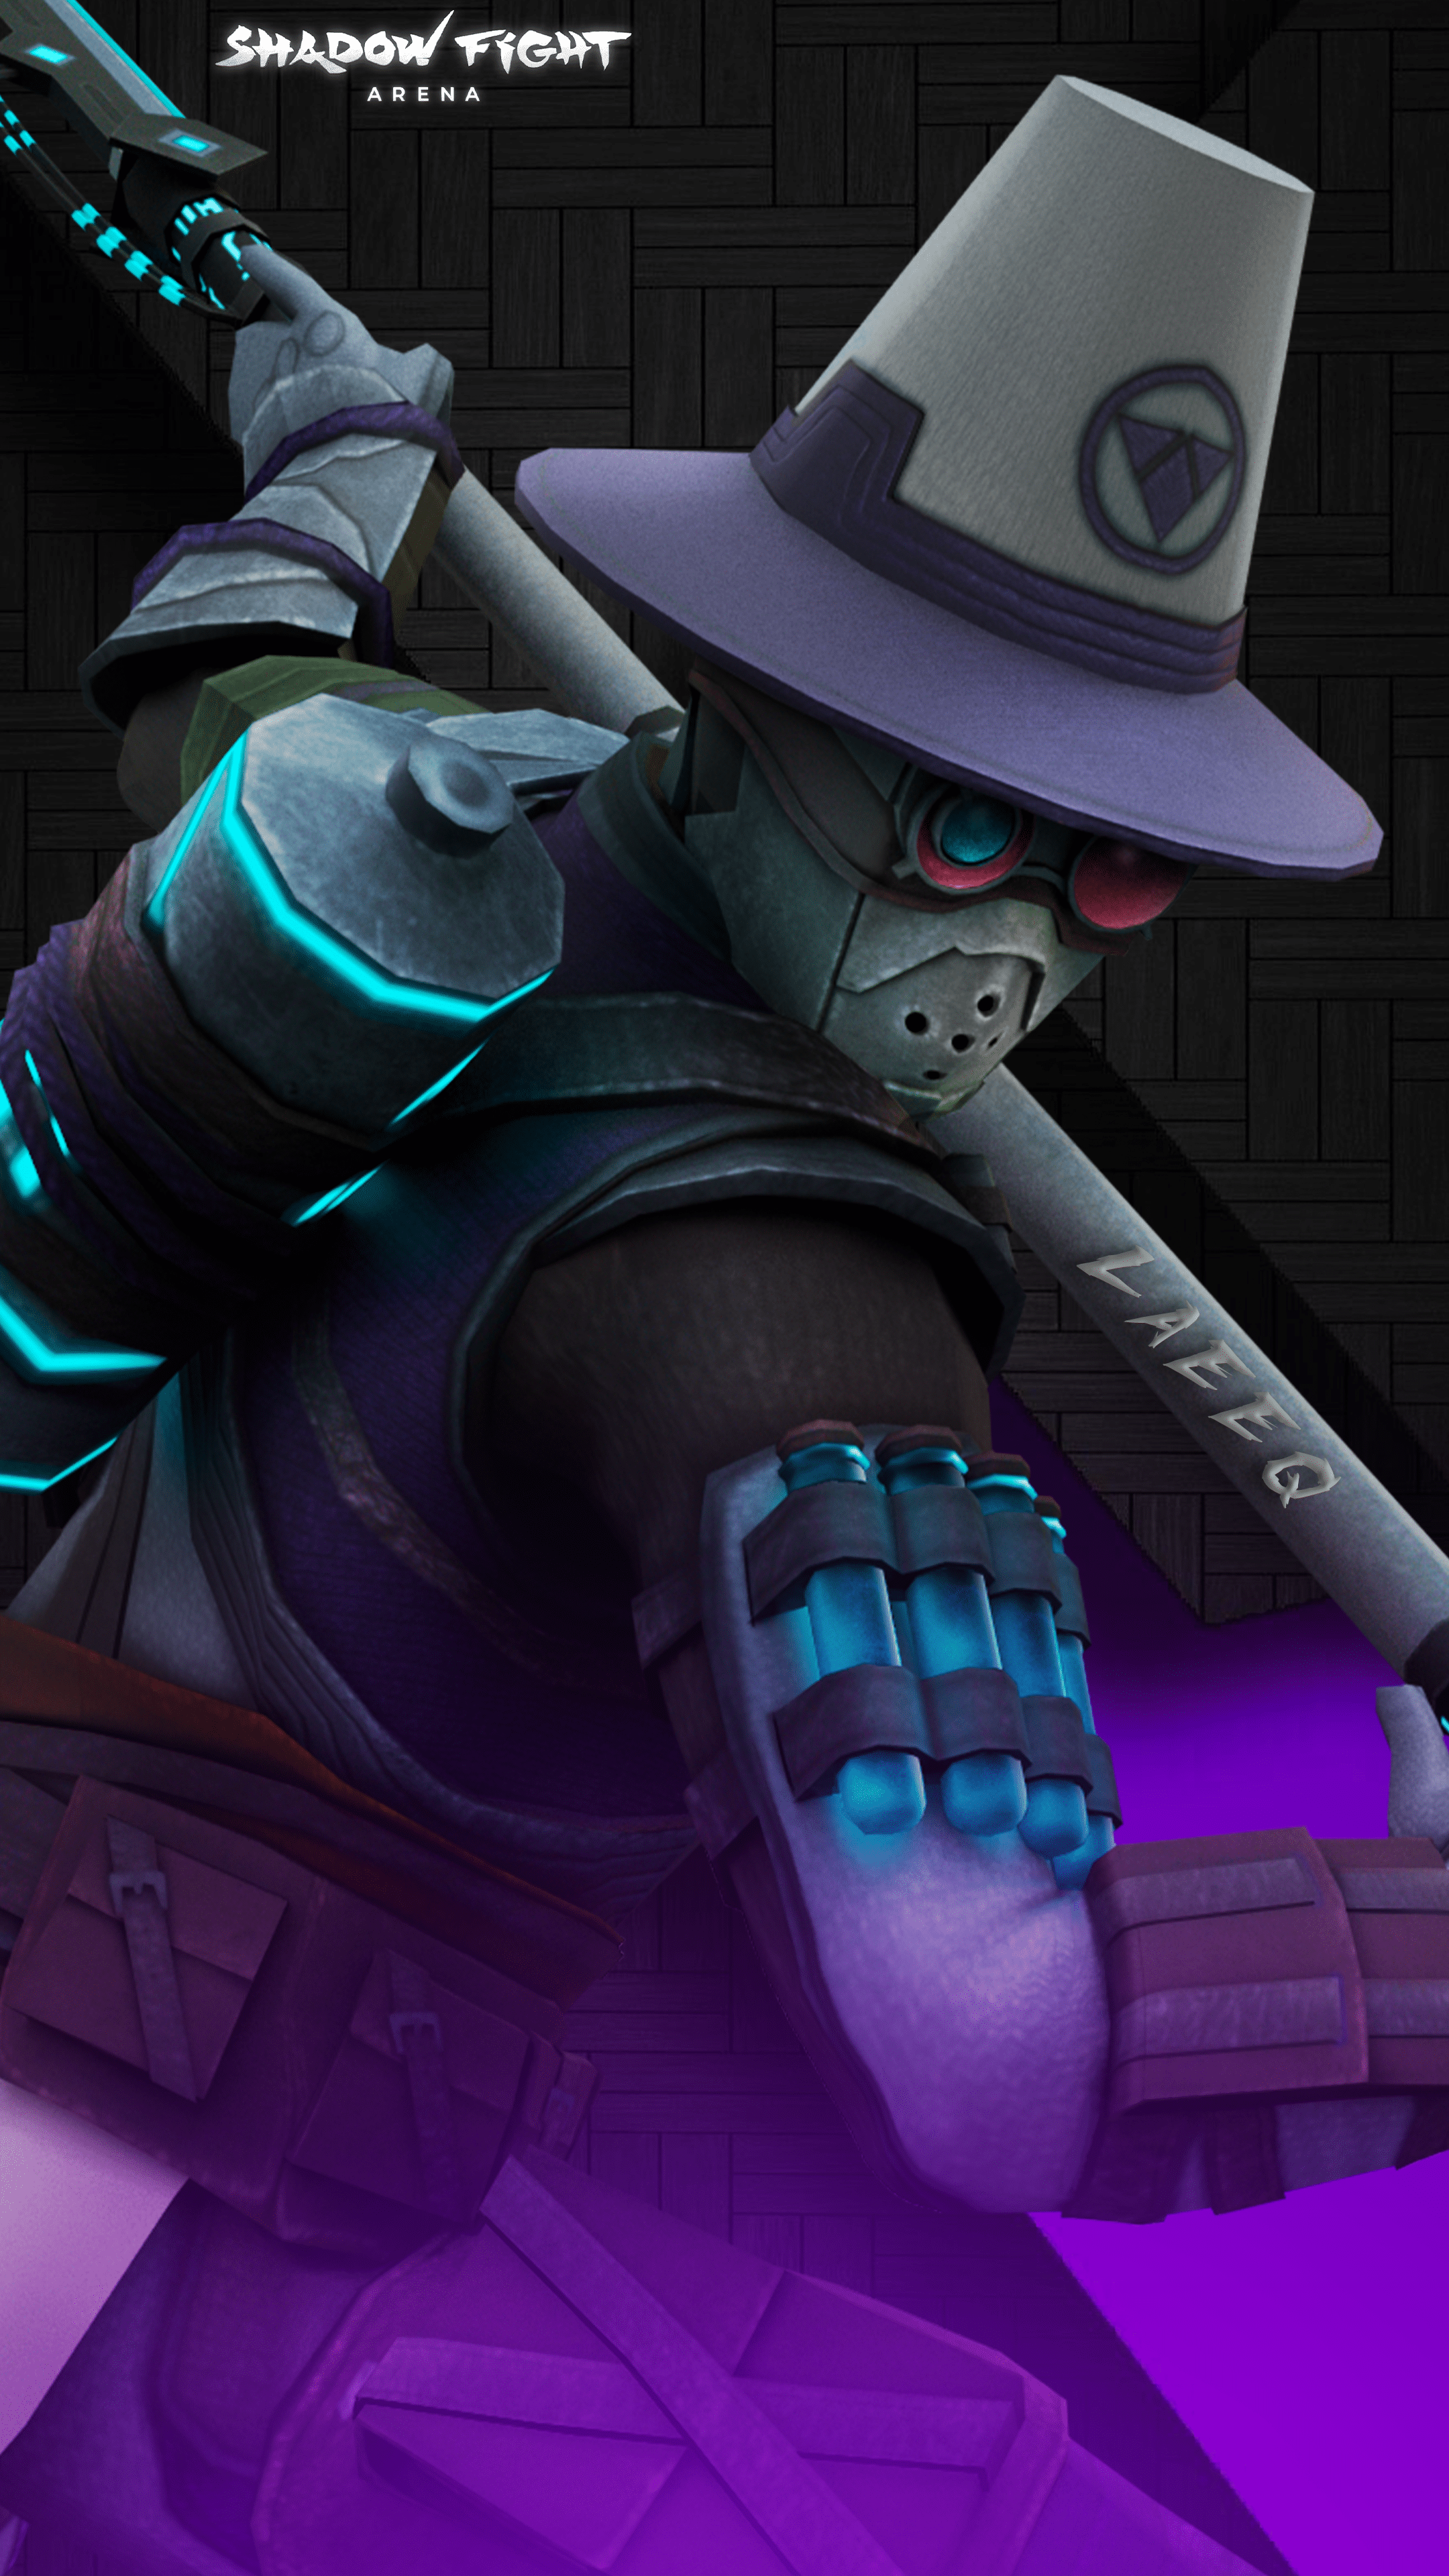 Sarge wallpaper I tried to make something scary 😅 : r/ShadowFightArena